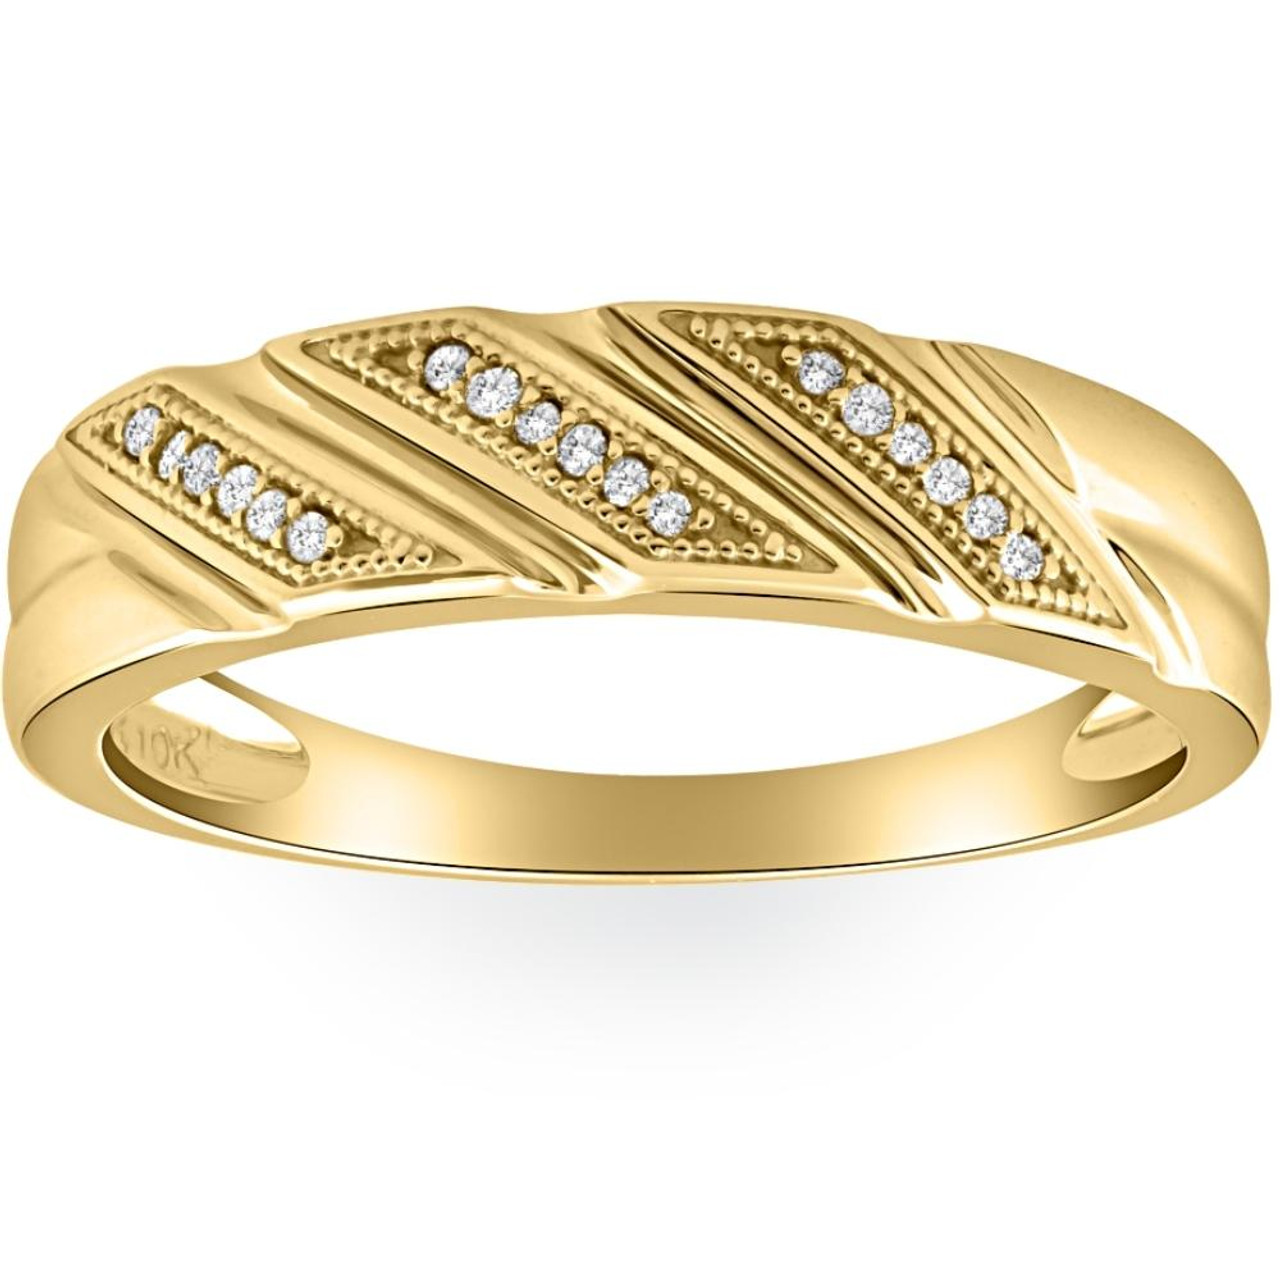 Beautiful Gold And Diamond Rings For Men With Weight And Price || INDHUS -  YouTube